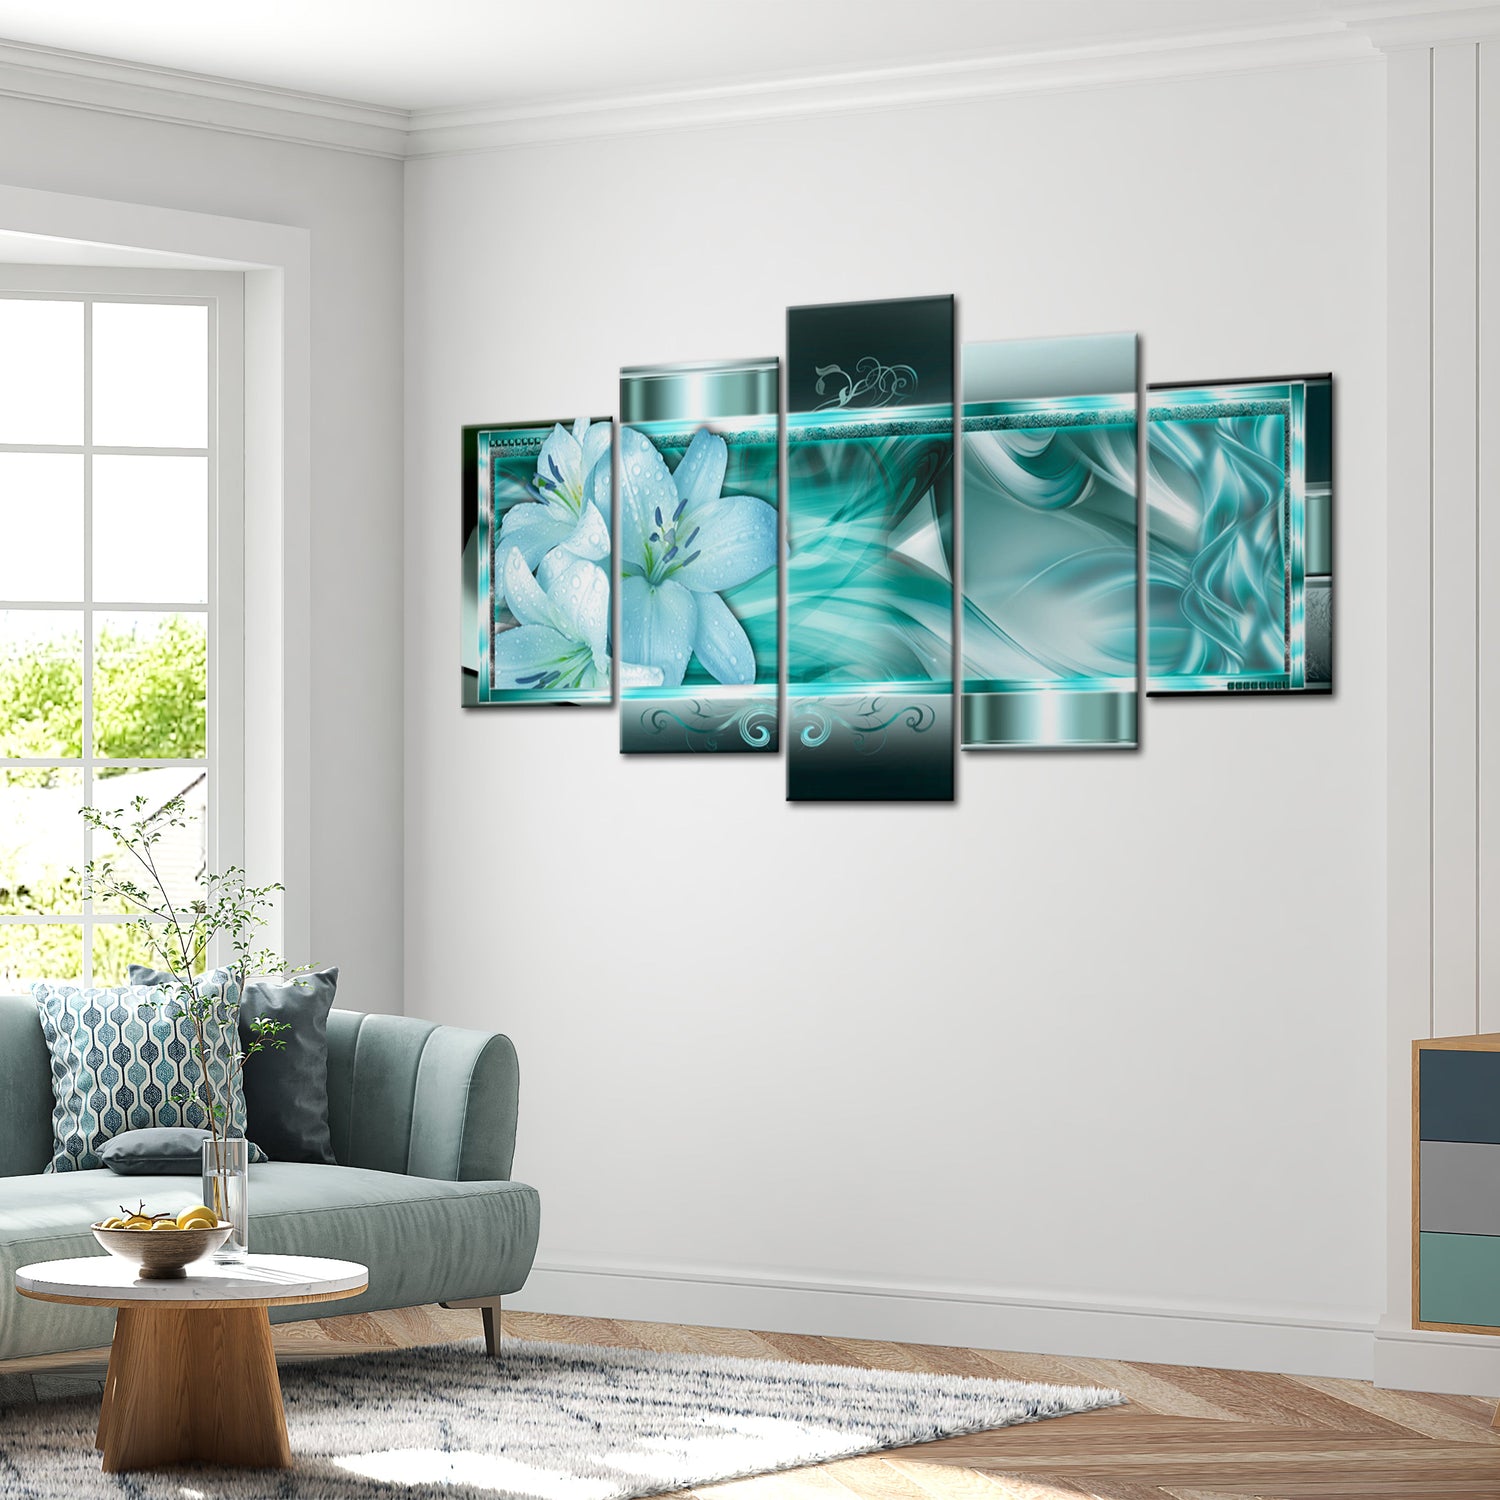 Glamour Canvas Wall Art - Azure Dream - 5 Pieces